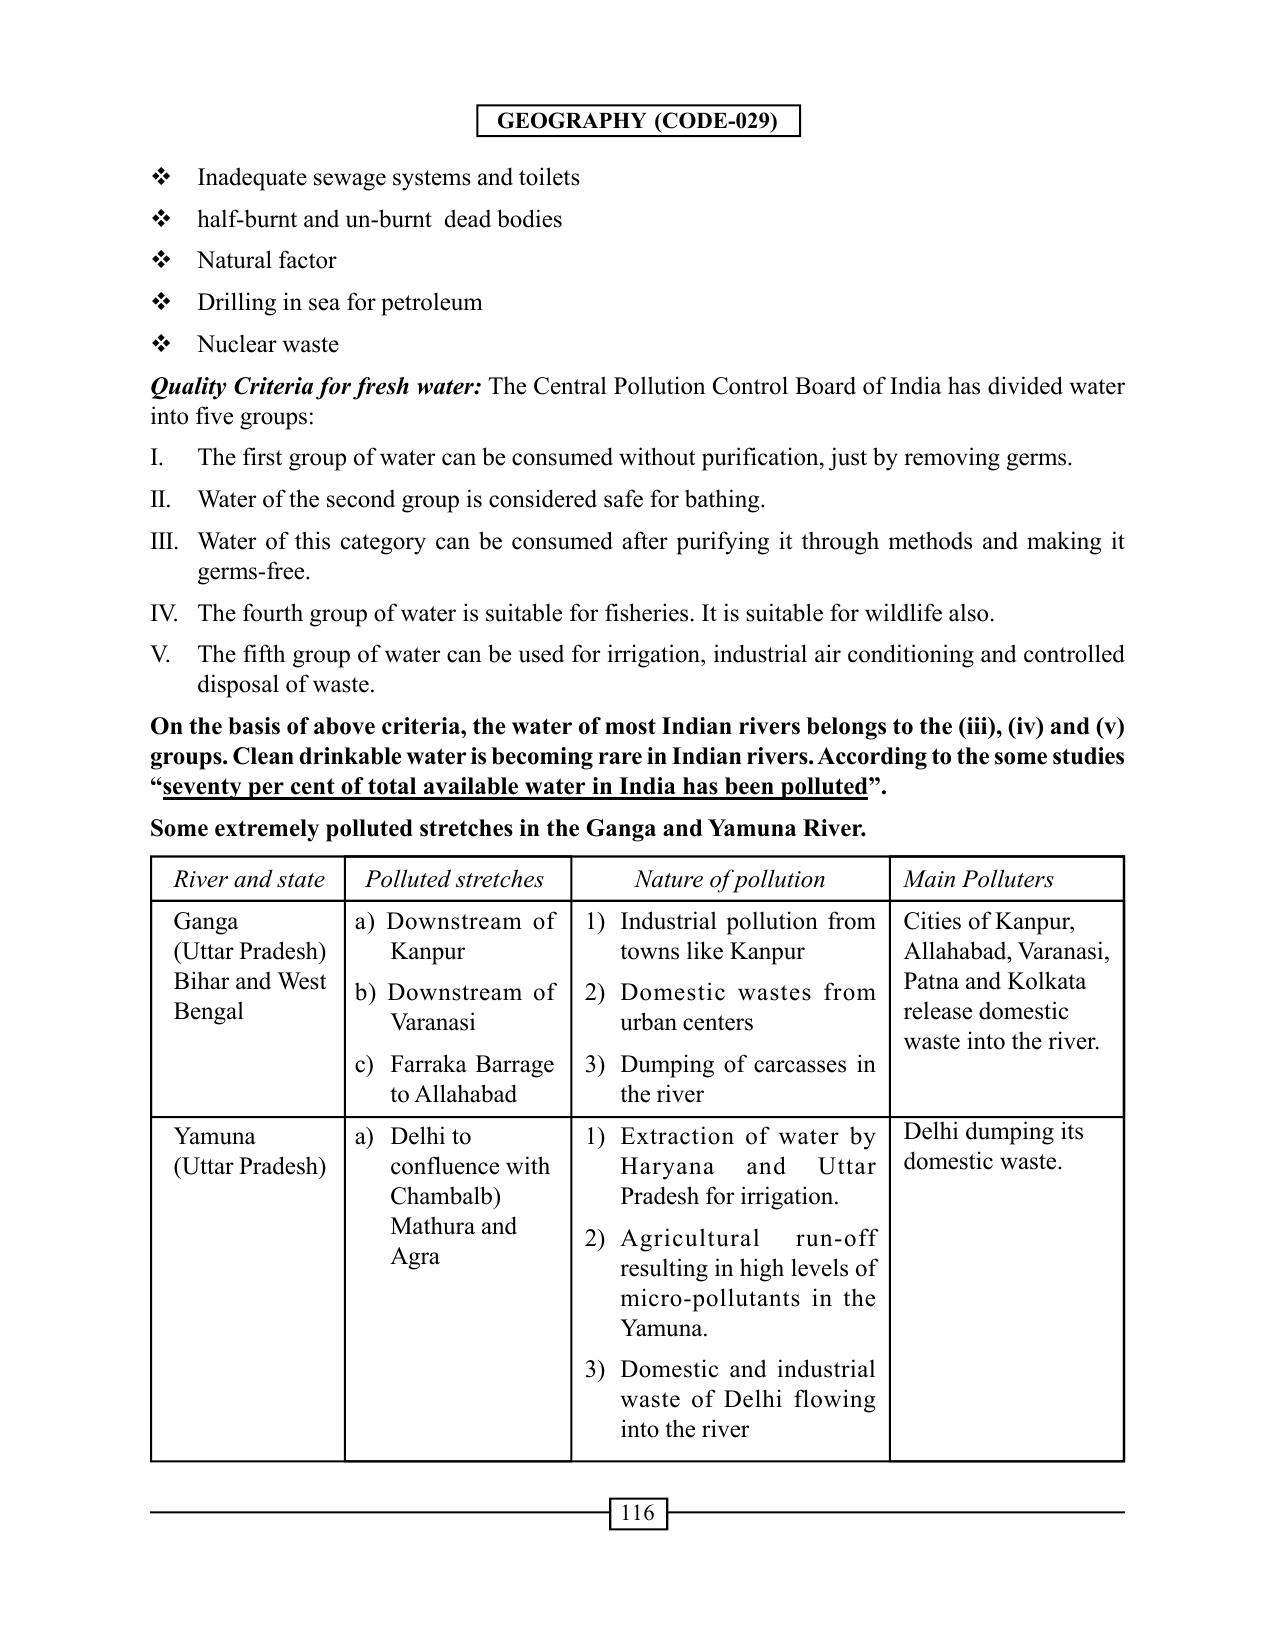 CBSE Worksheets for Class 12 Geography Geographical Perspective on Selected Issues and Problems - Page 3